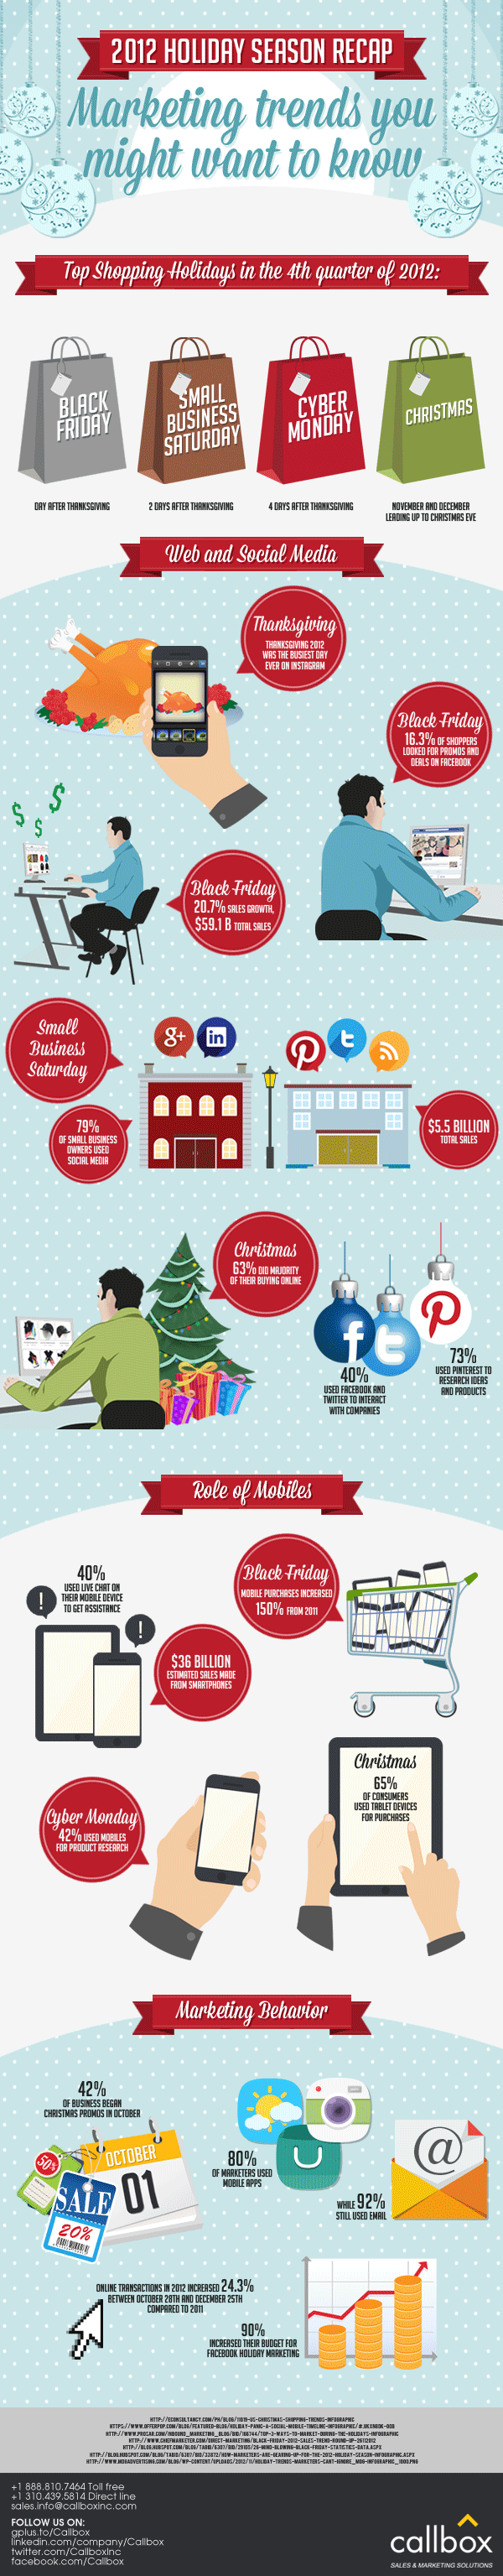 Prepping for the holidays: A look back on 2012’s holiday marketing trends